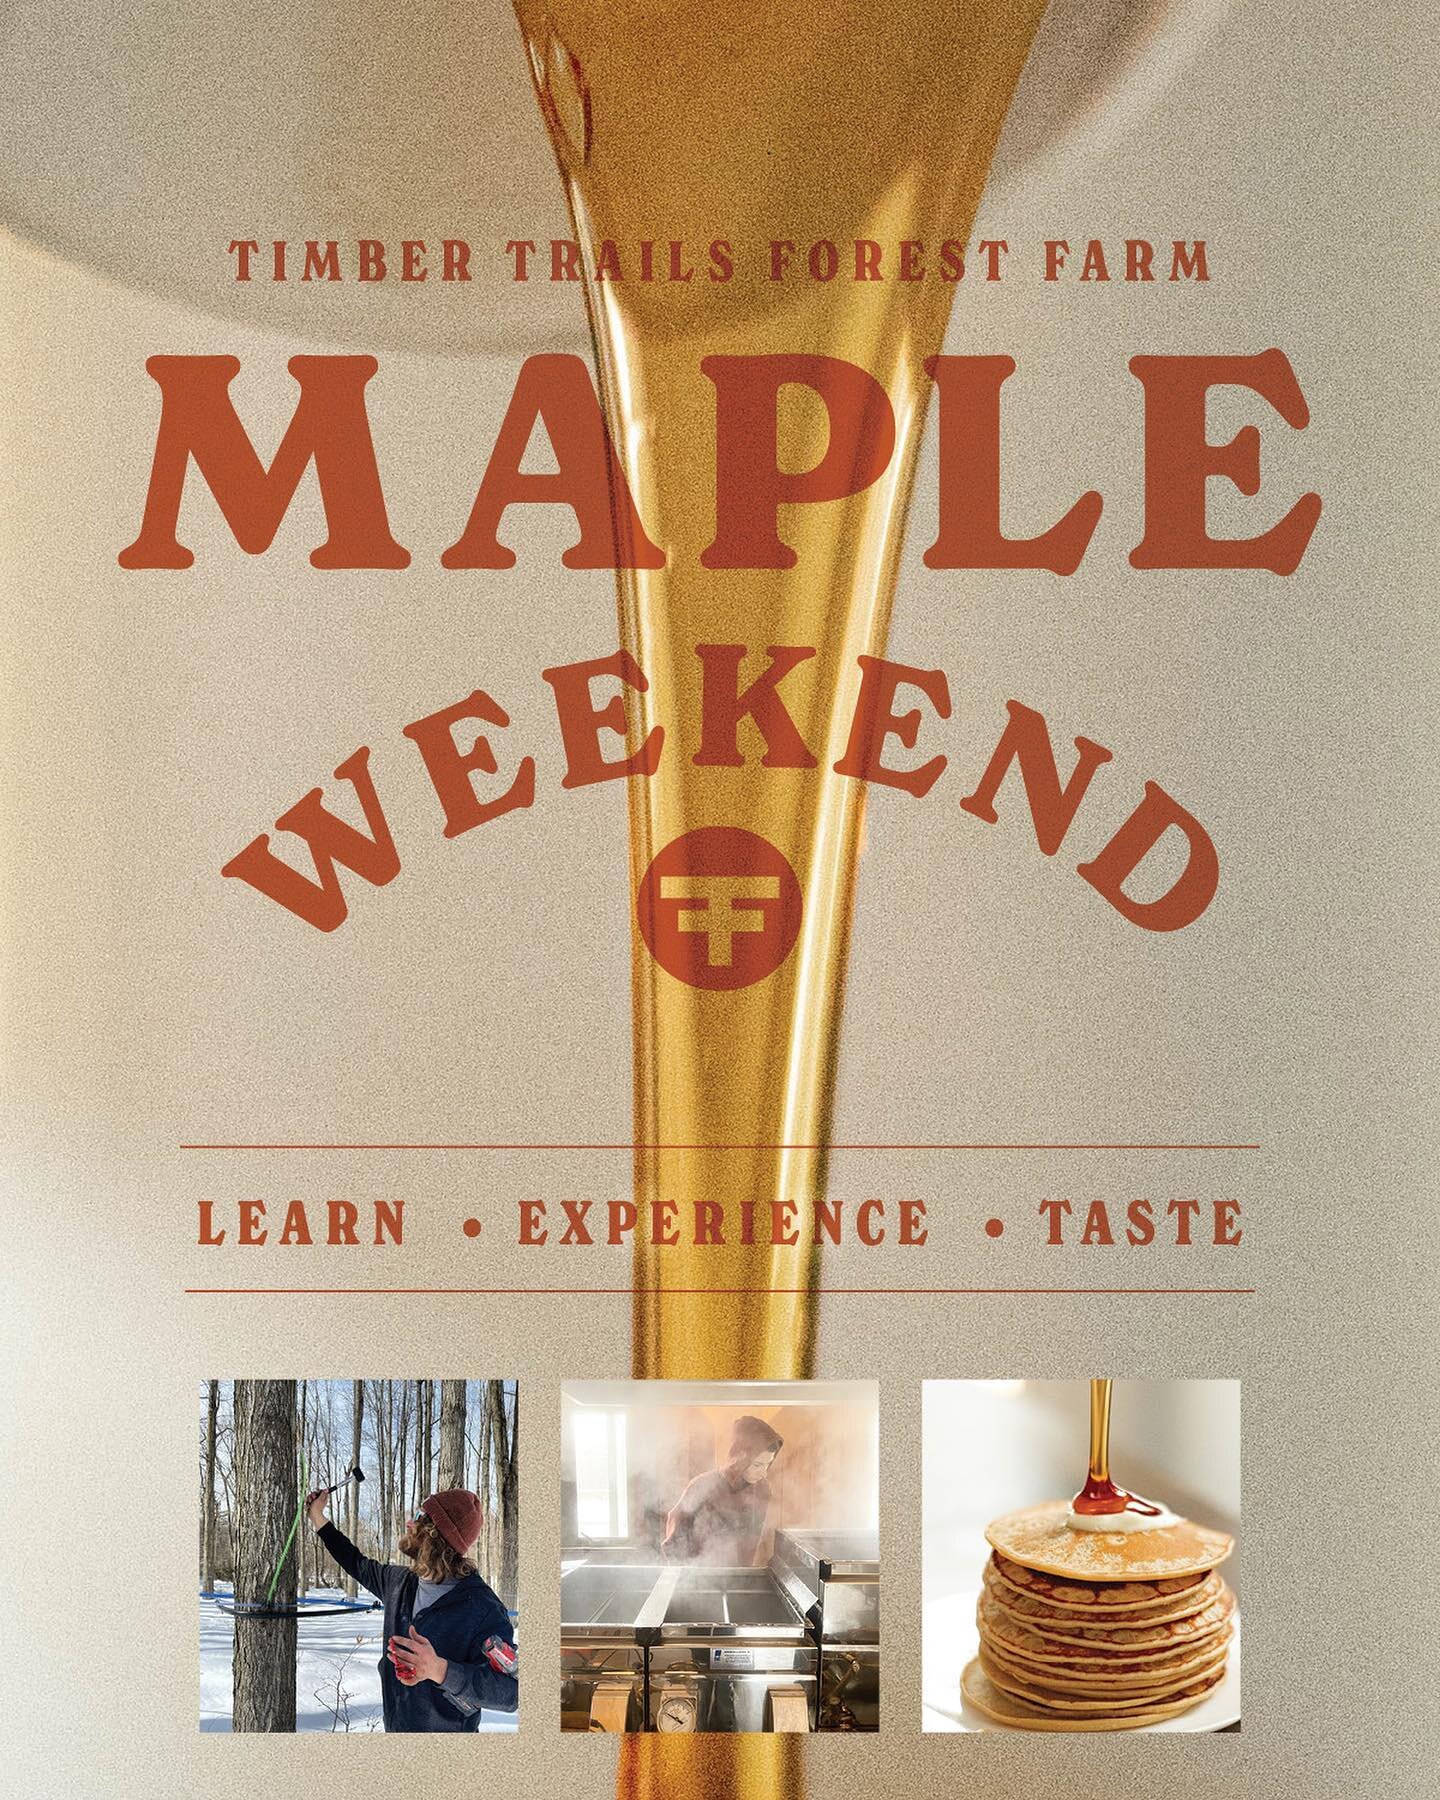 Surprise! We will be having all you can eat pancakes this Saturday and Sunday for Maple Weekend provided by the Valley Inn!🥞🍁😋

All you can eat pancakes $12 for adults and $8 for kids. 10am-4pm Saturday and Sunday. 🥞🥞🥞